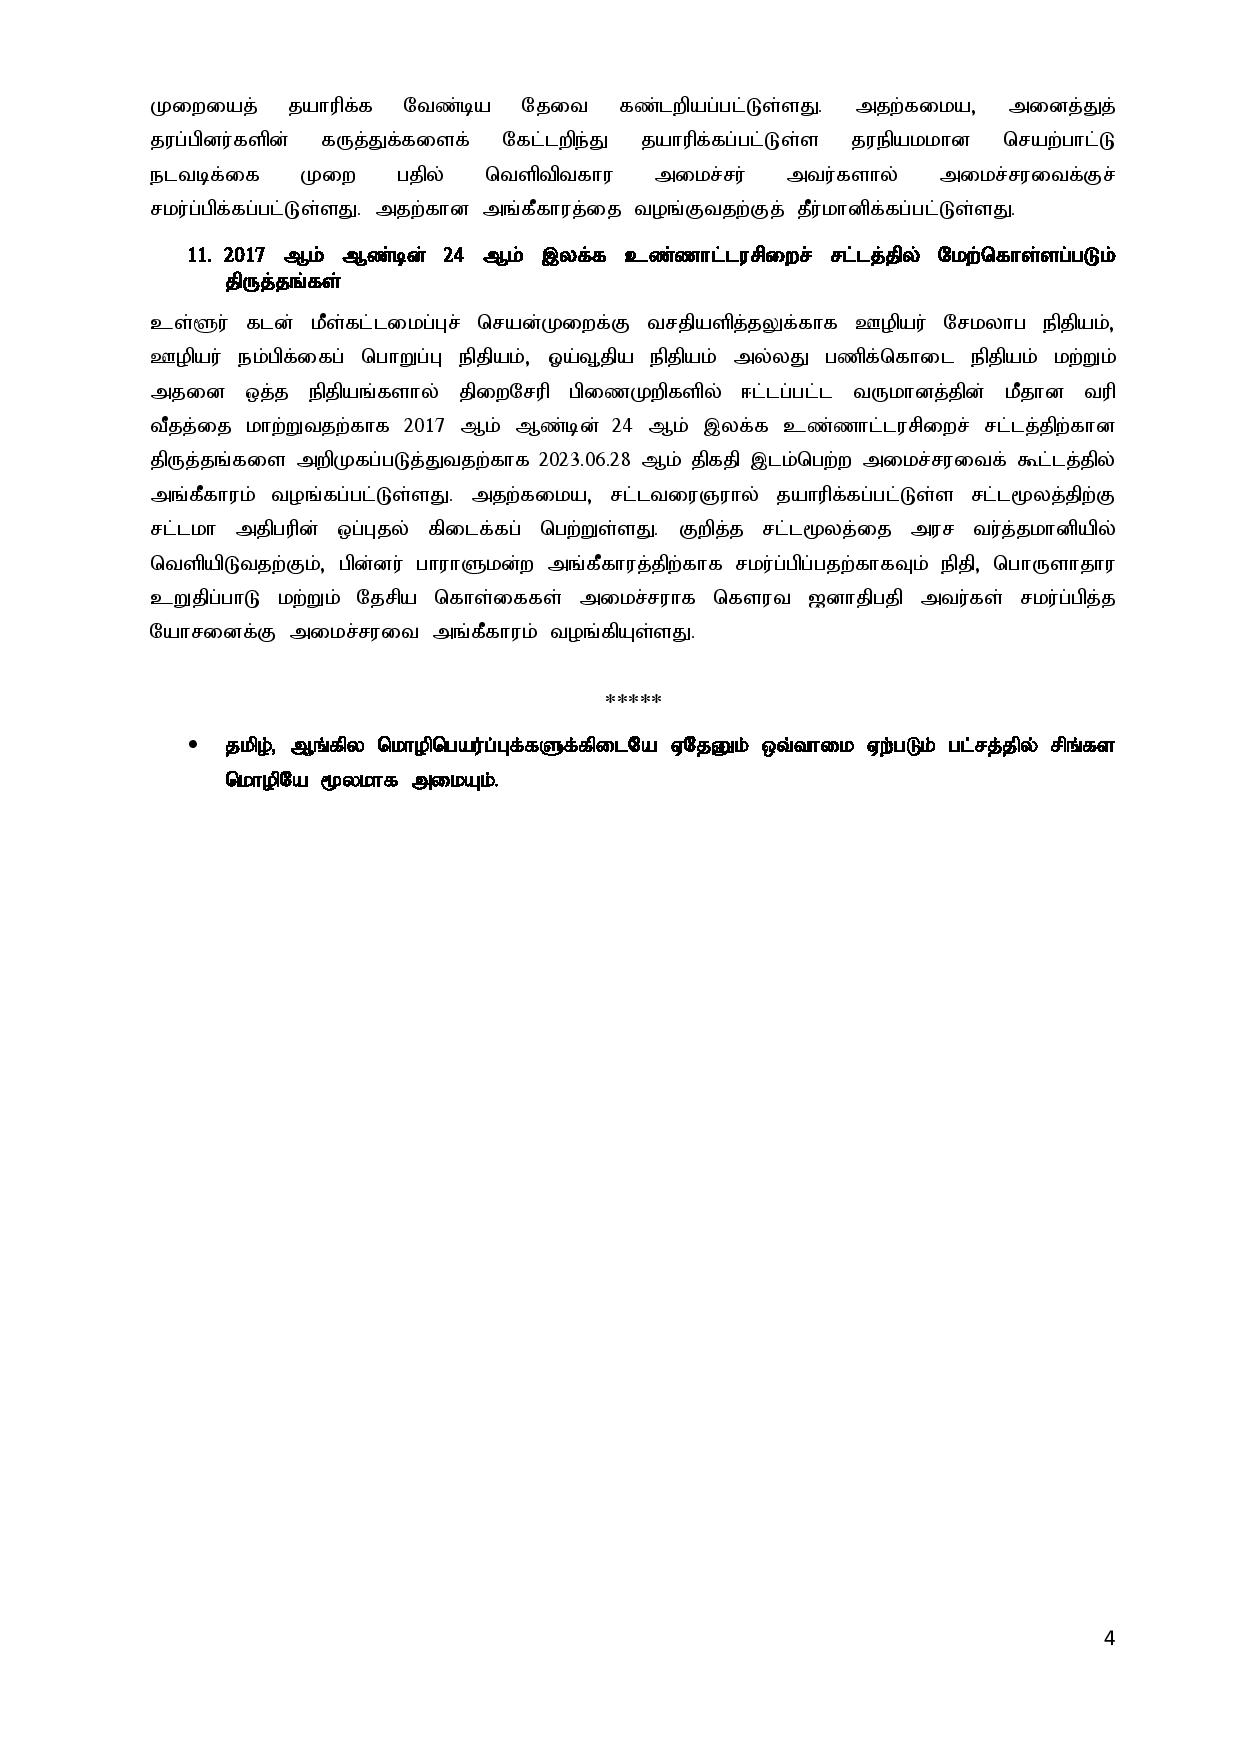 Cabinet Decisions on 17.07.2023 Tamil page 004